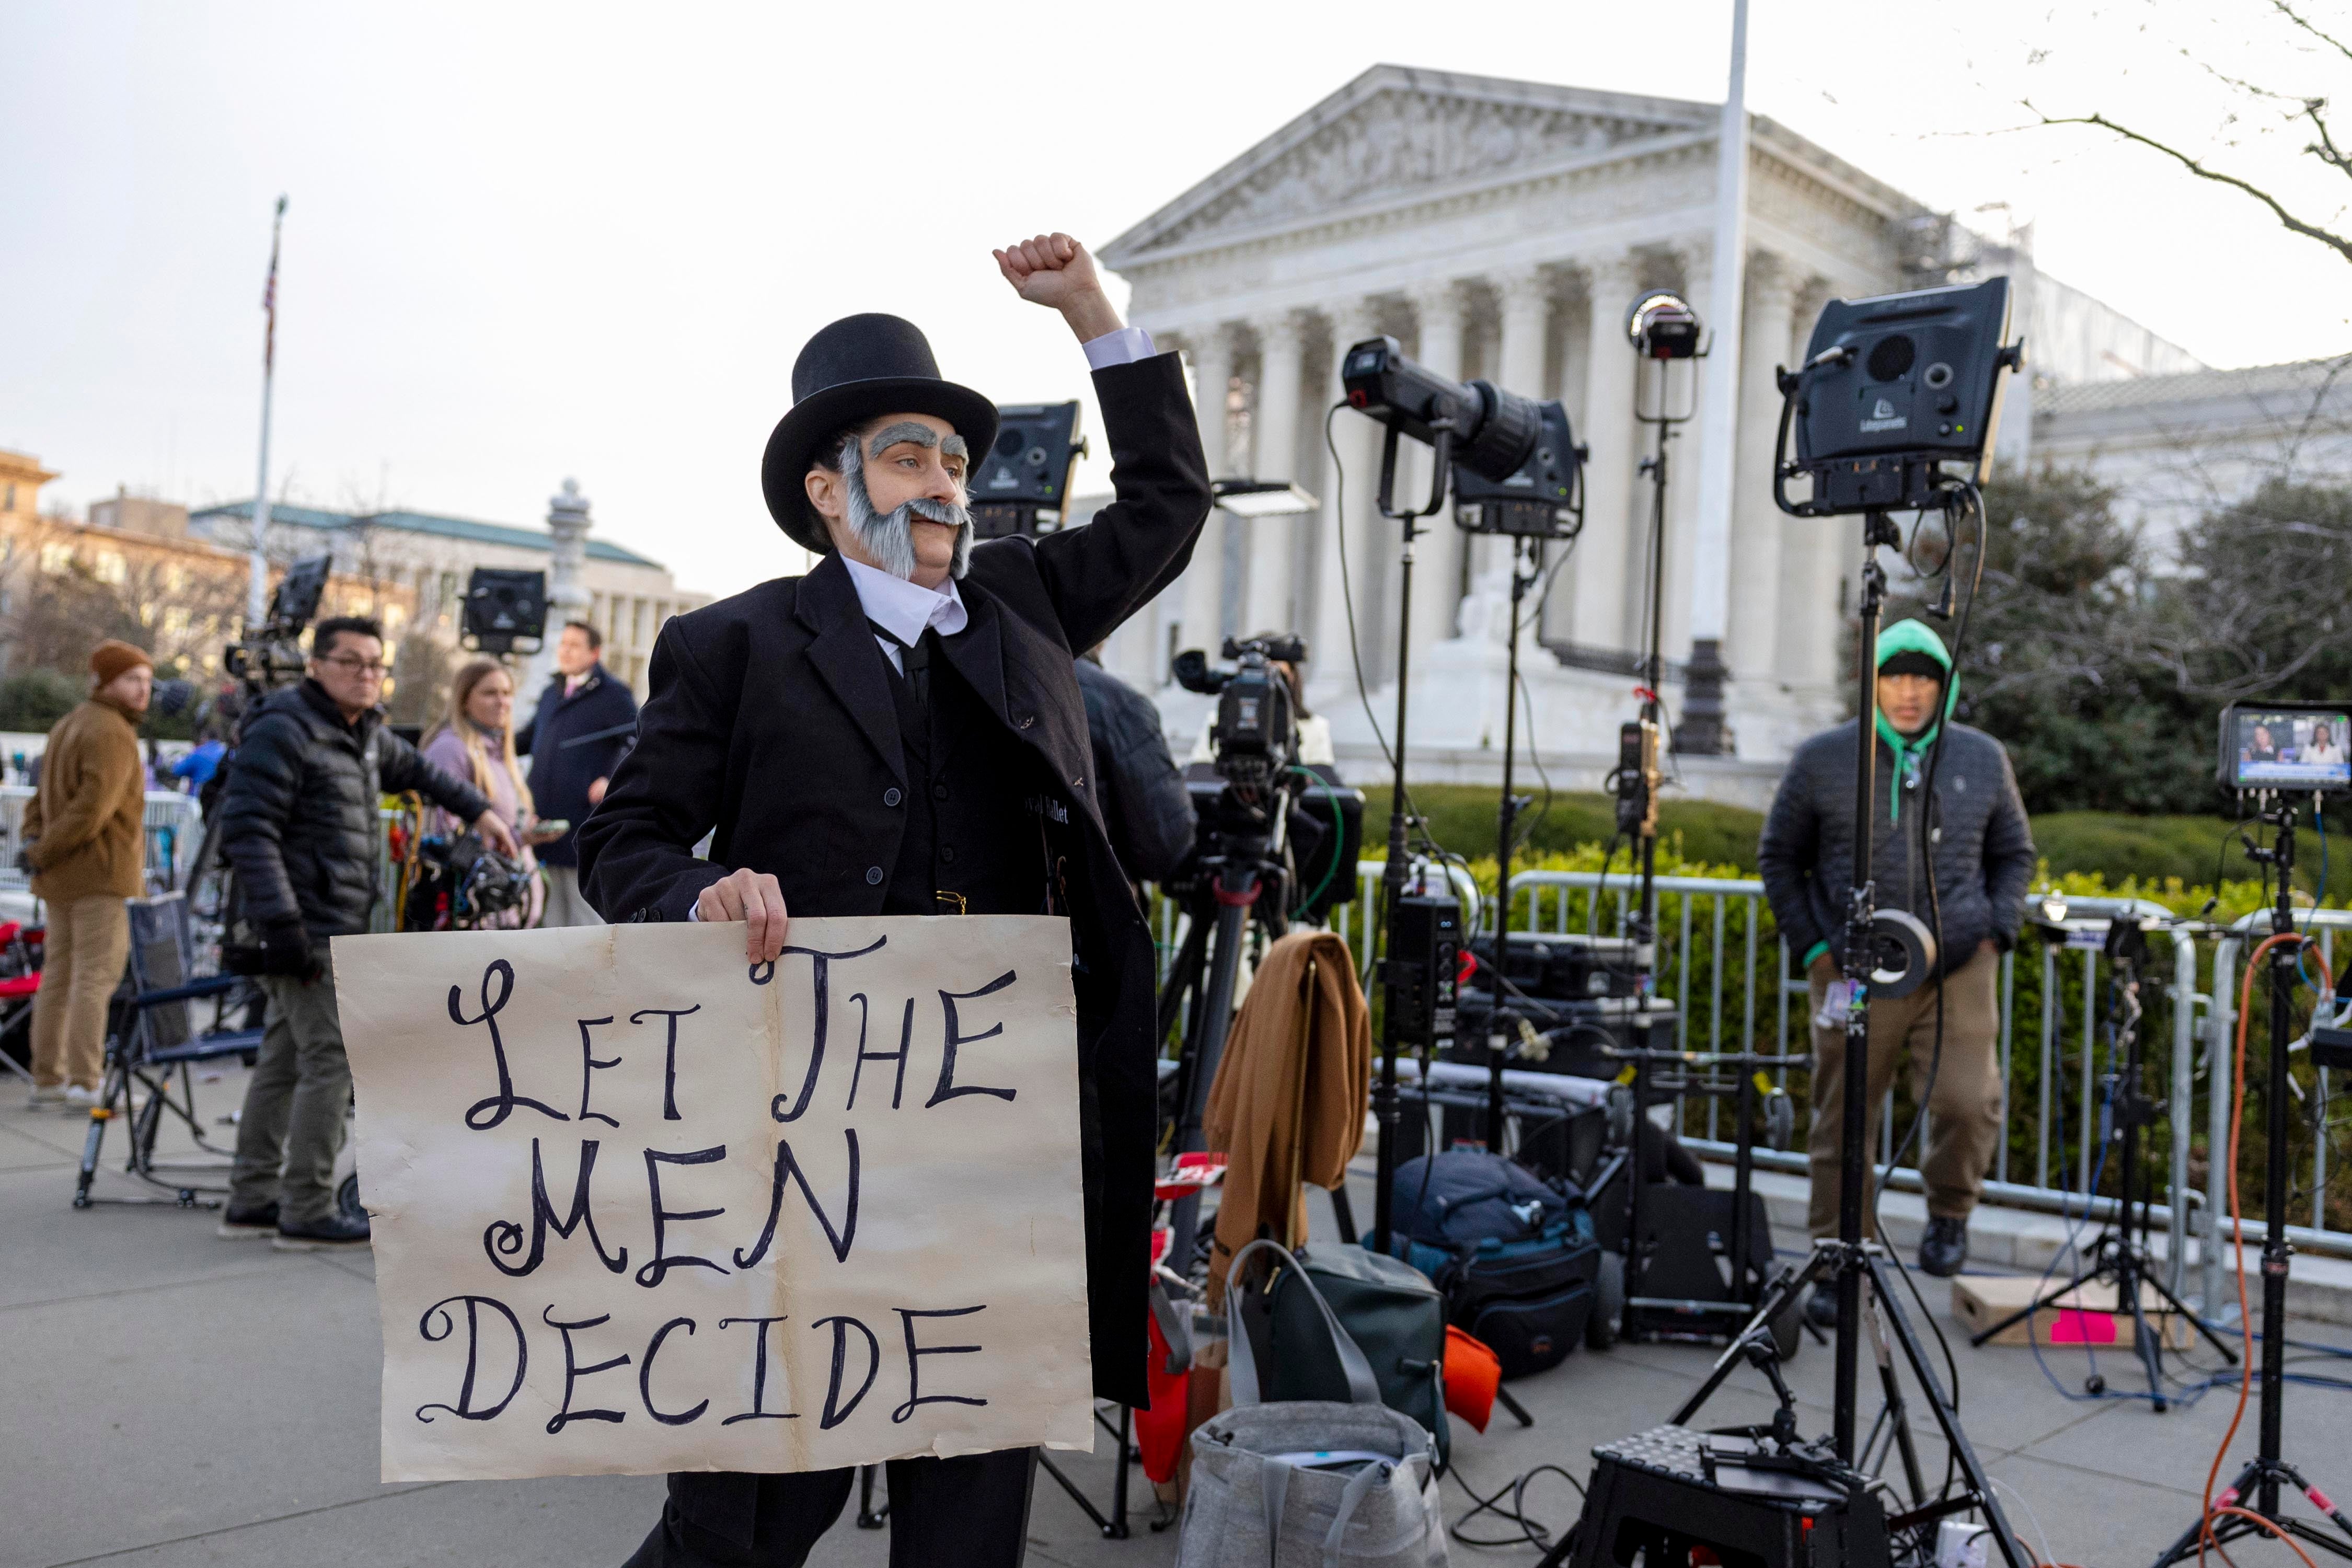 Molly Gaebe of the Abortion Access Front protests outside the US Supreme Court on 26 March dressed as 19th century anti-vice crusader Anthony Comstock.